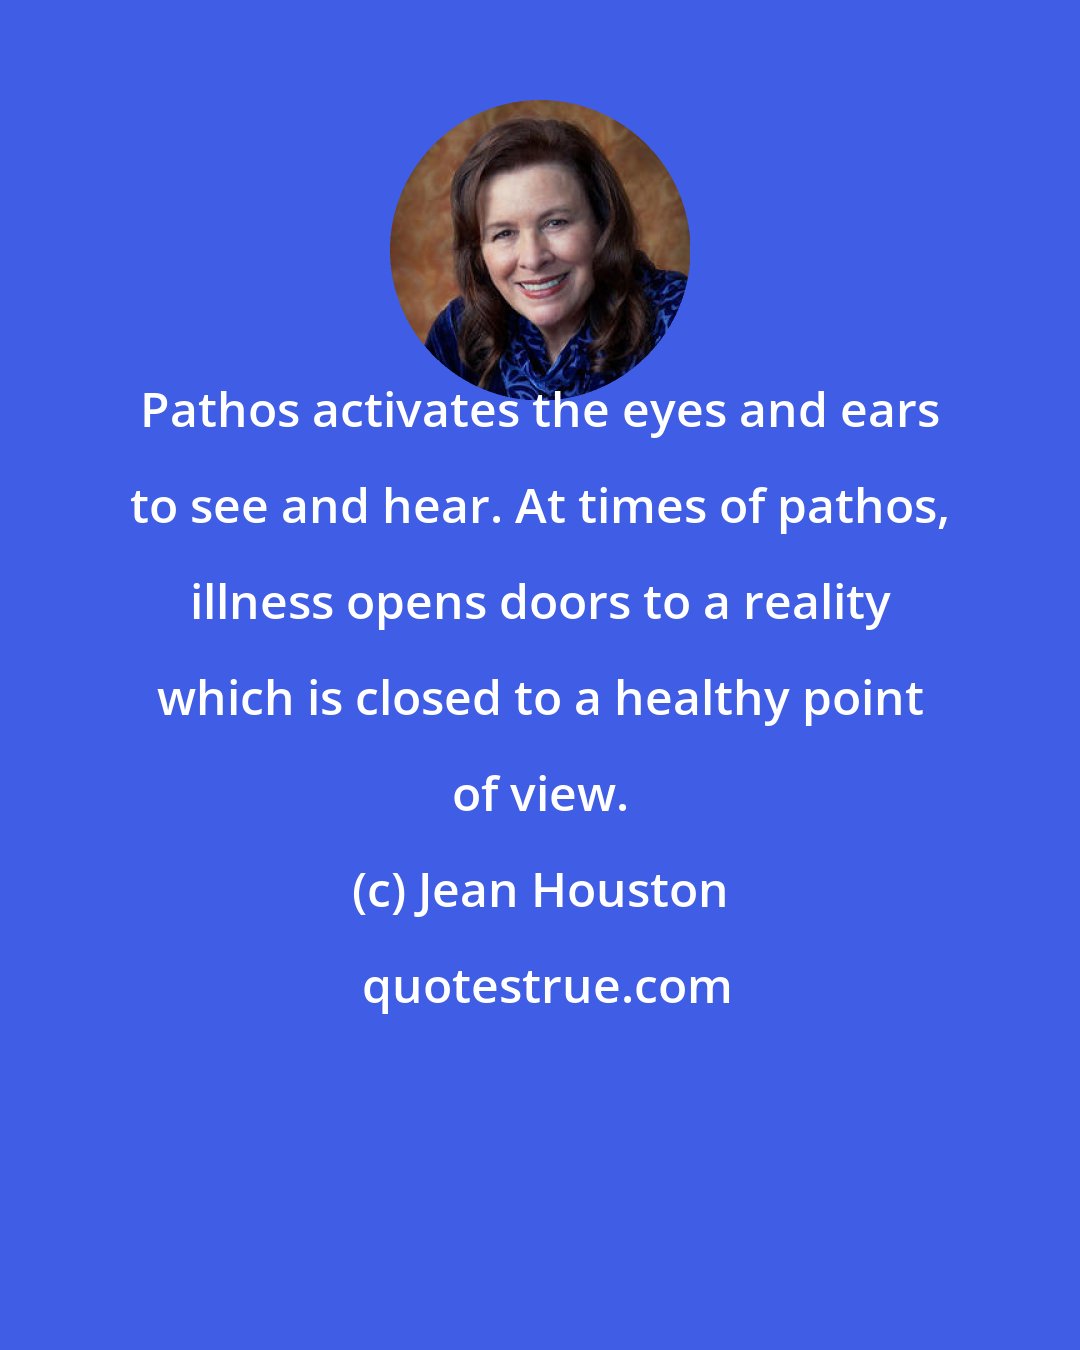 Jean Houston: Pathos activates the eyes and ears to see and hear. At times of pathos, illness opens doors to a reality which is closed to a healthy point of view.